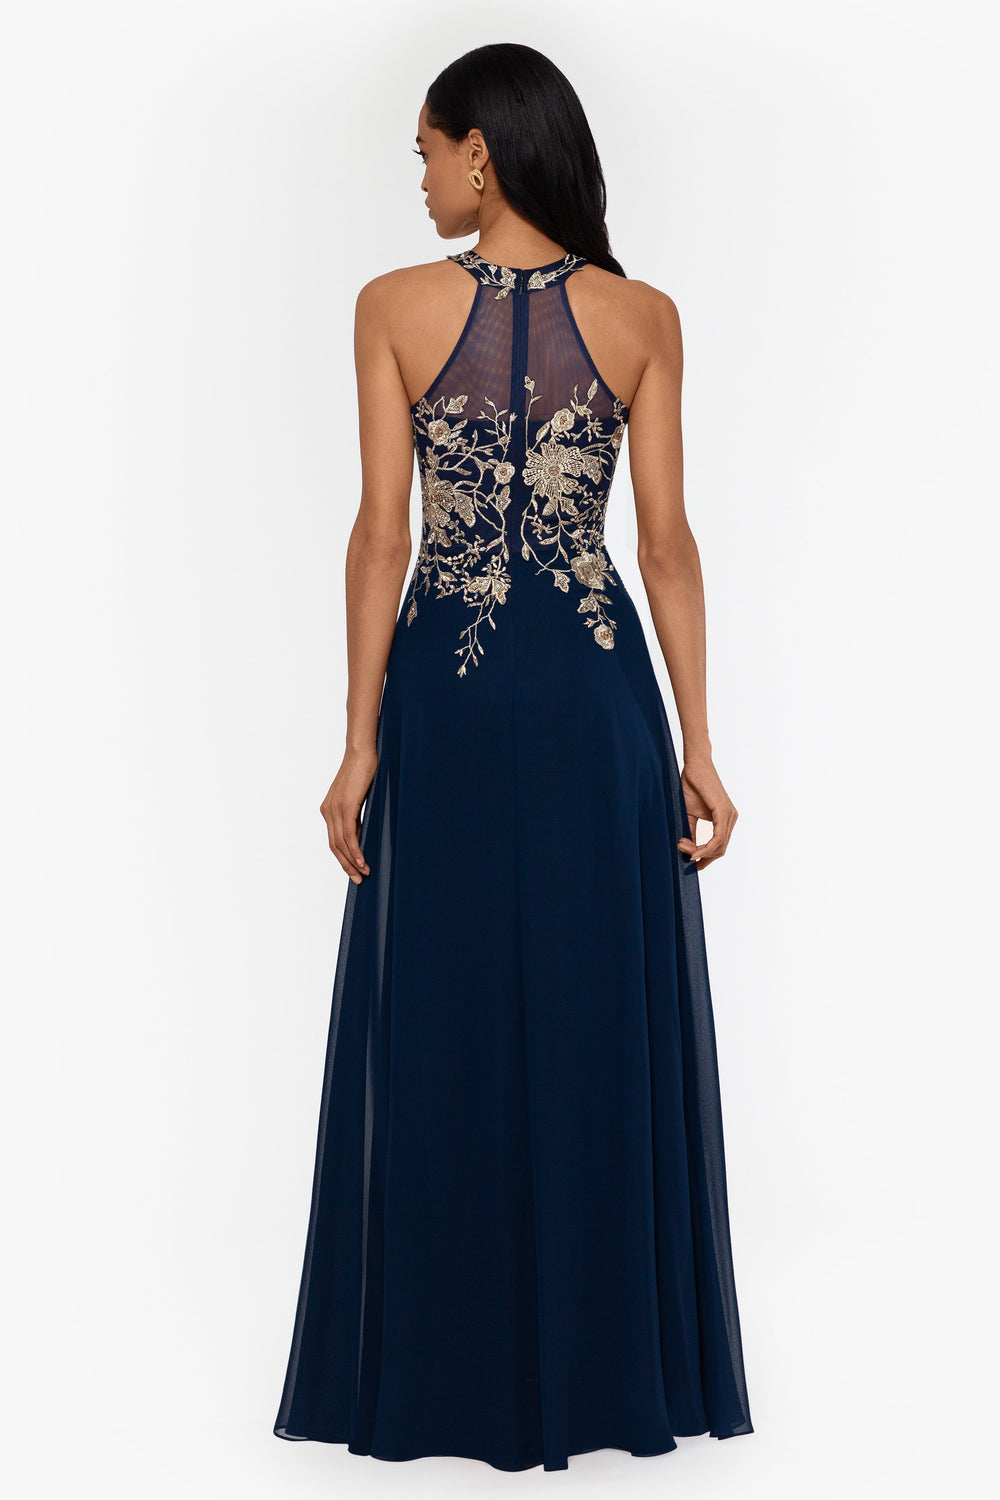 Petite "Celeste" Long Embroidered Chiffon Gown - Betsy & Adam